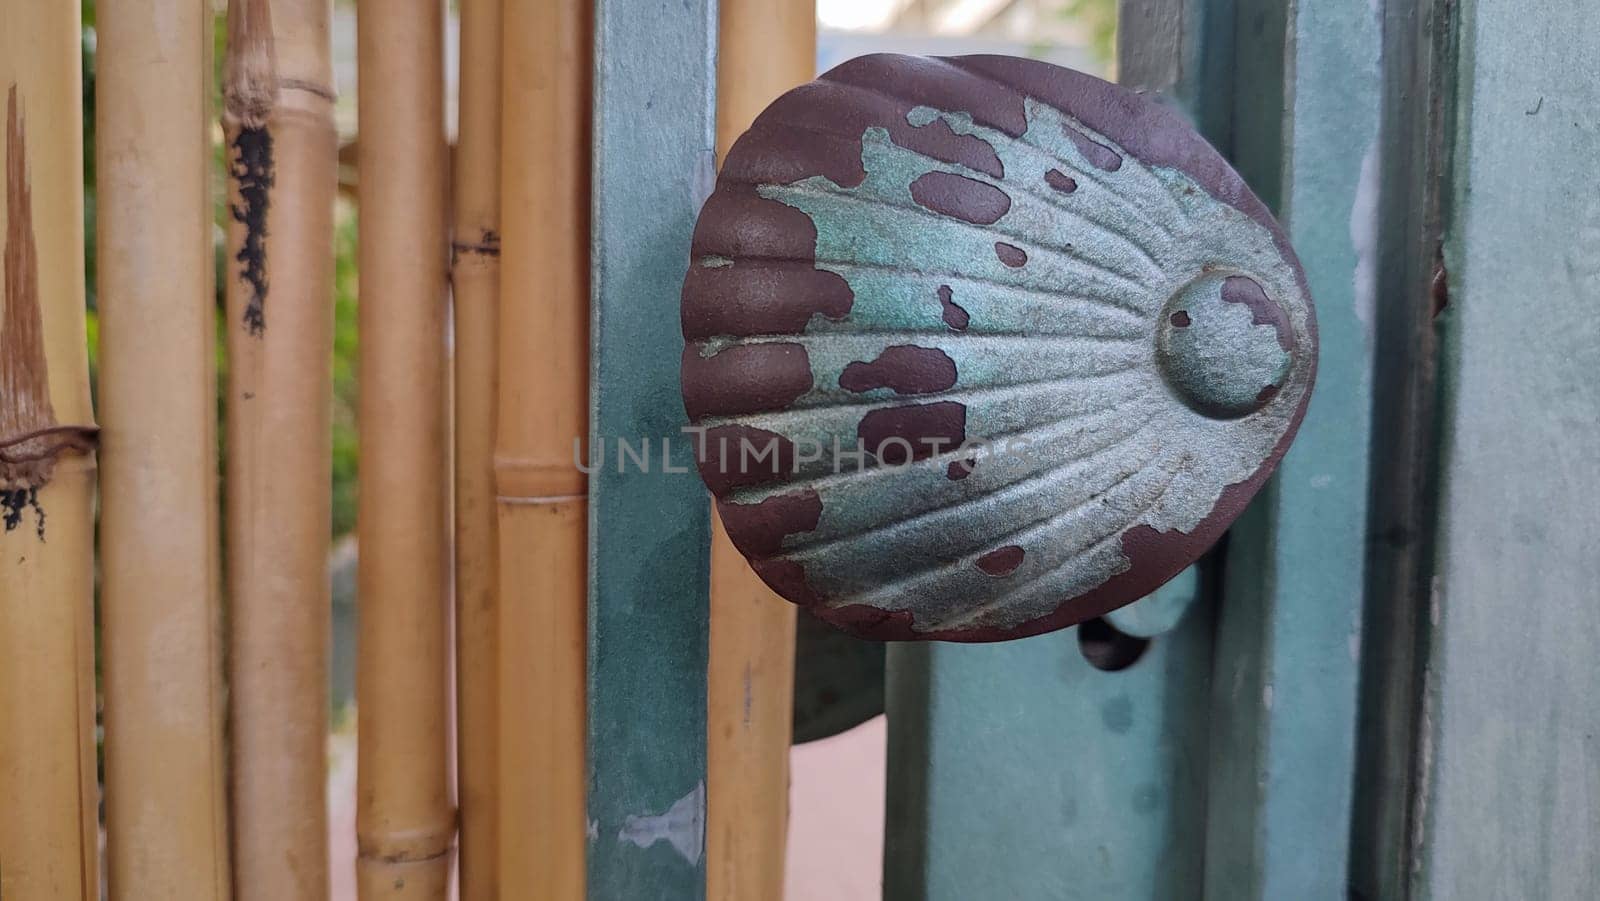 outdoor fence made of bamboo and metal, objects. High quality photo